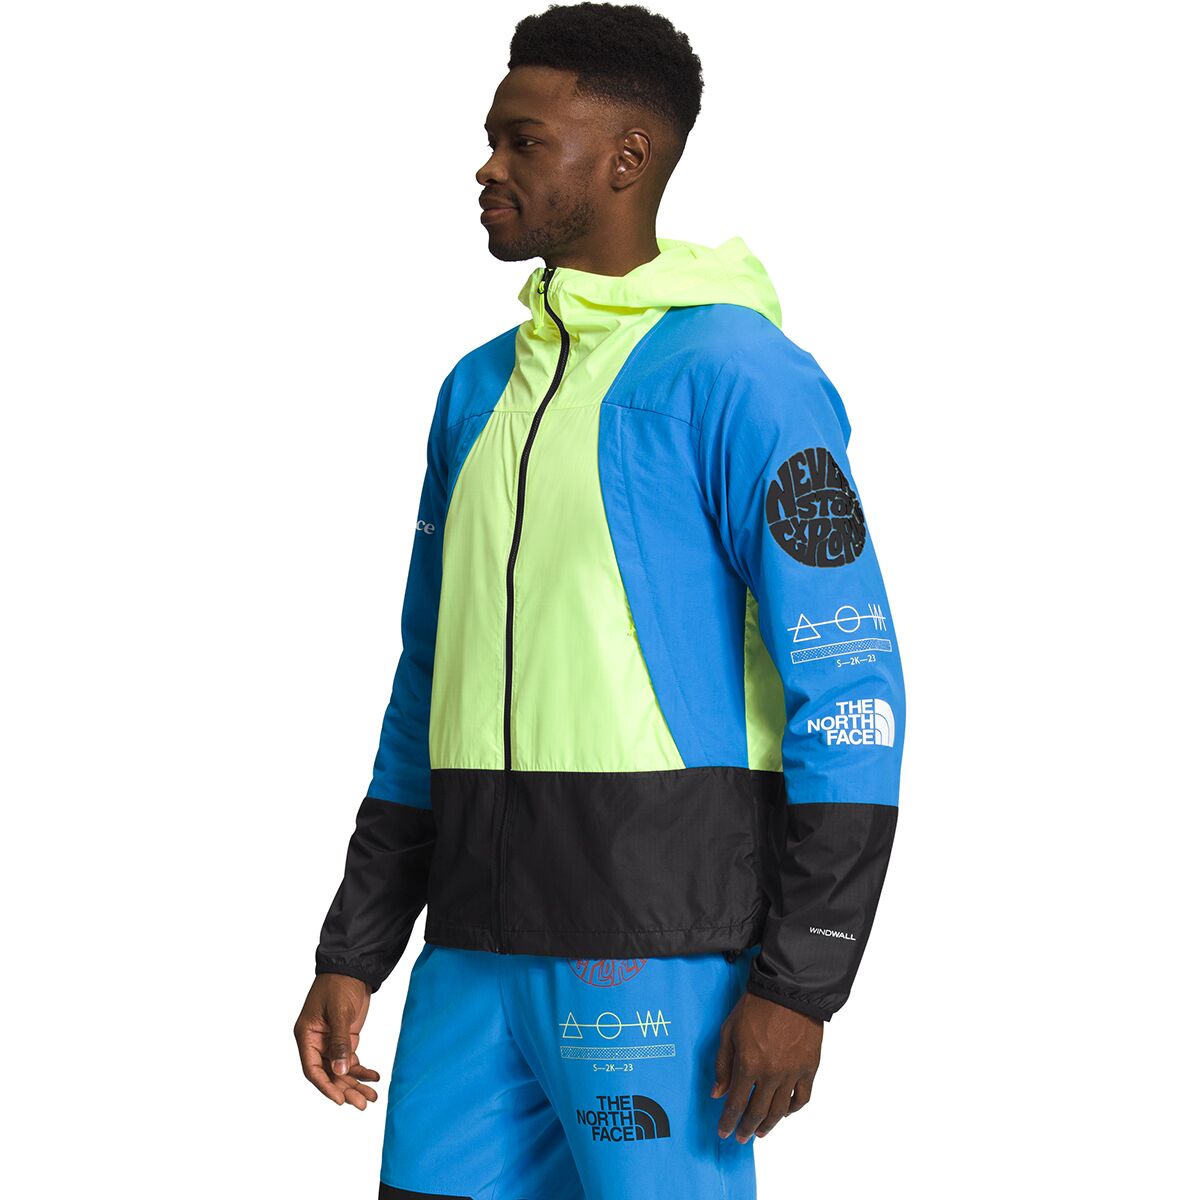 mus eller rotte transfusion mekanisme The North Face Trailwear Wind Whistle Jacket - Men's - Clothing